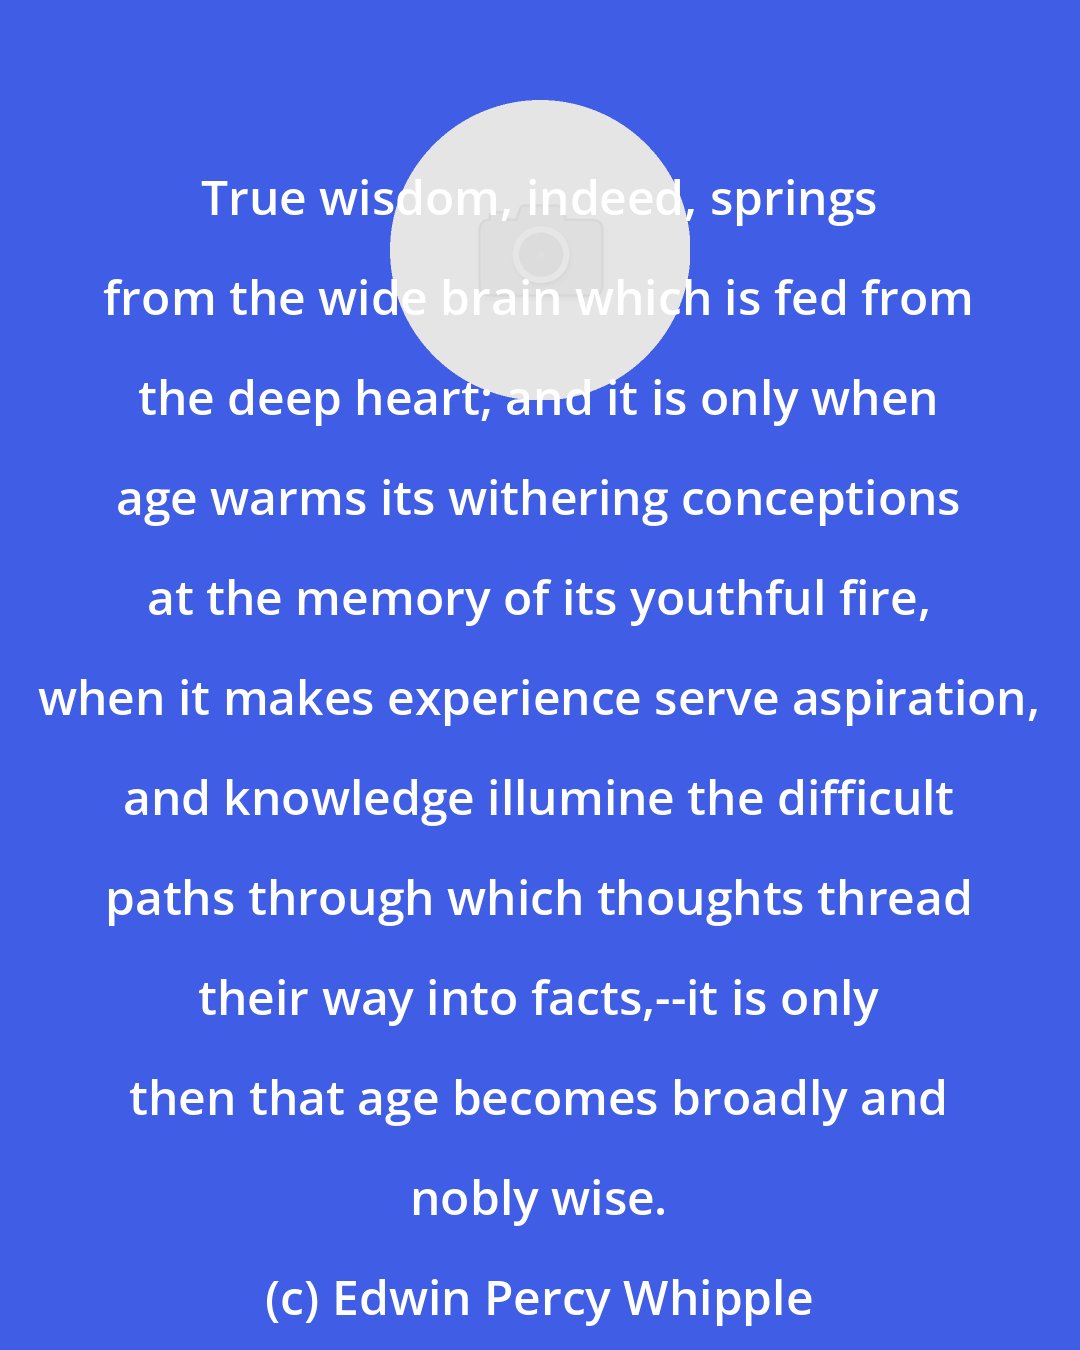 Edwin Percy Whipple: True wisdom, indeed, springs from the wide brain which is fed from the deep heart; and it is only when age warms its withering conceptions at the memory of its youthful fire, when it makes experience serve aspiration, and knowledge illumine the difficult paths through which thoughts thread their way into facts,--it is only then that age becomes broadly and nobly wise.